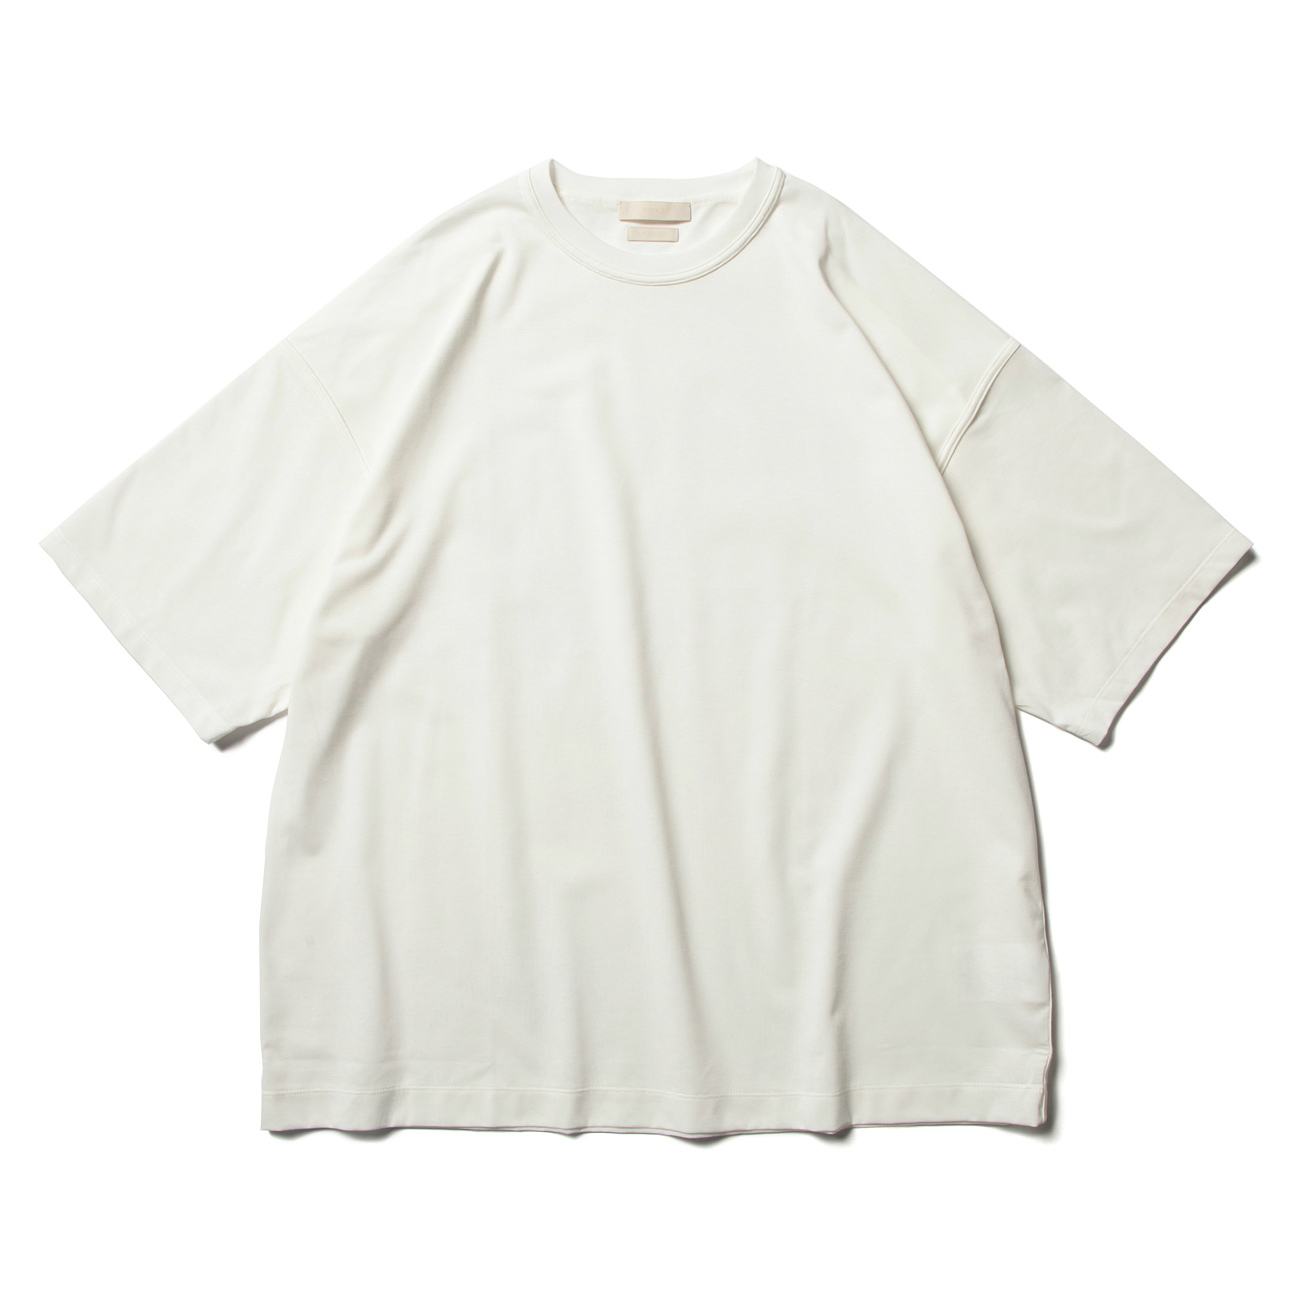 OVERSIZED INSIDE-OUT T-SHIRT - White